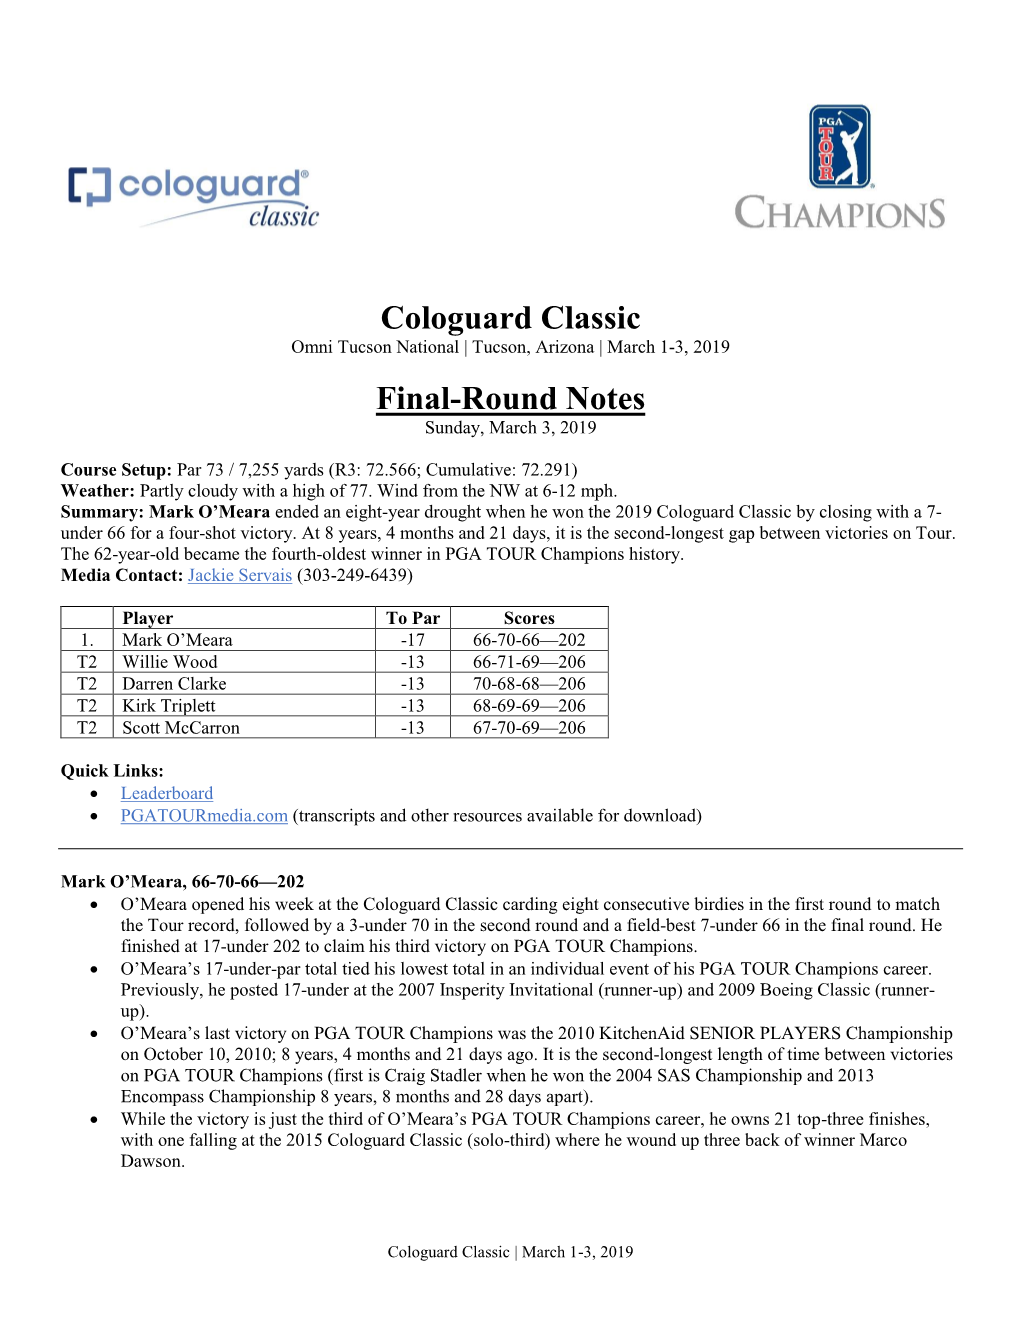 Cologuard Classic Final-Round Notes